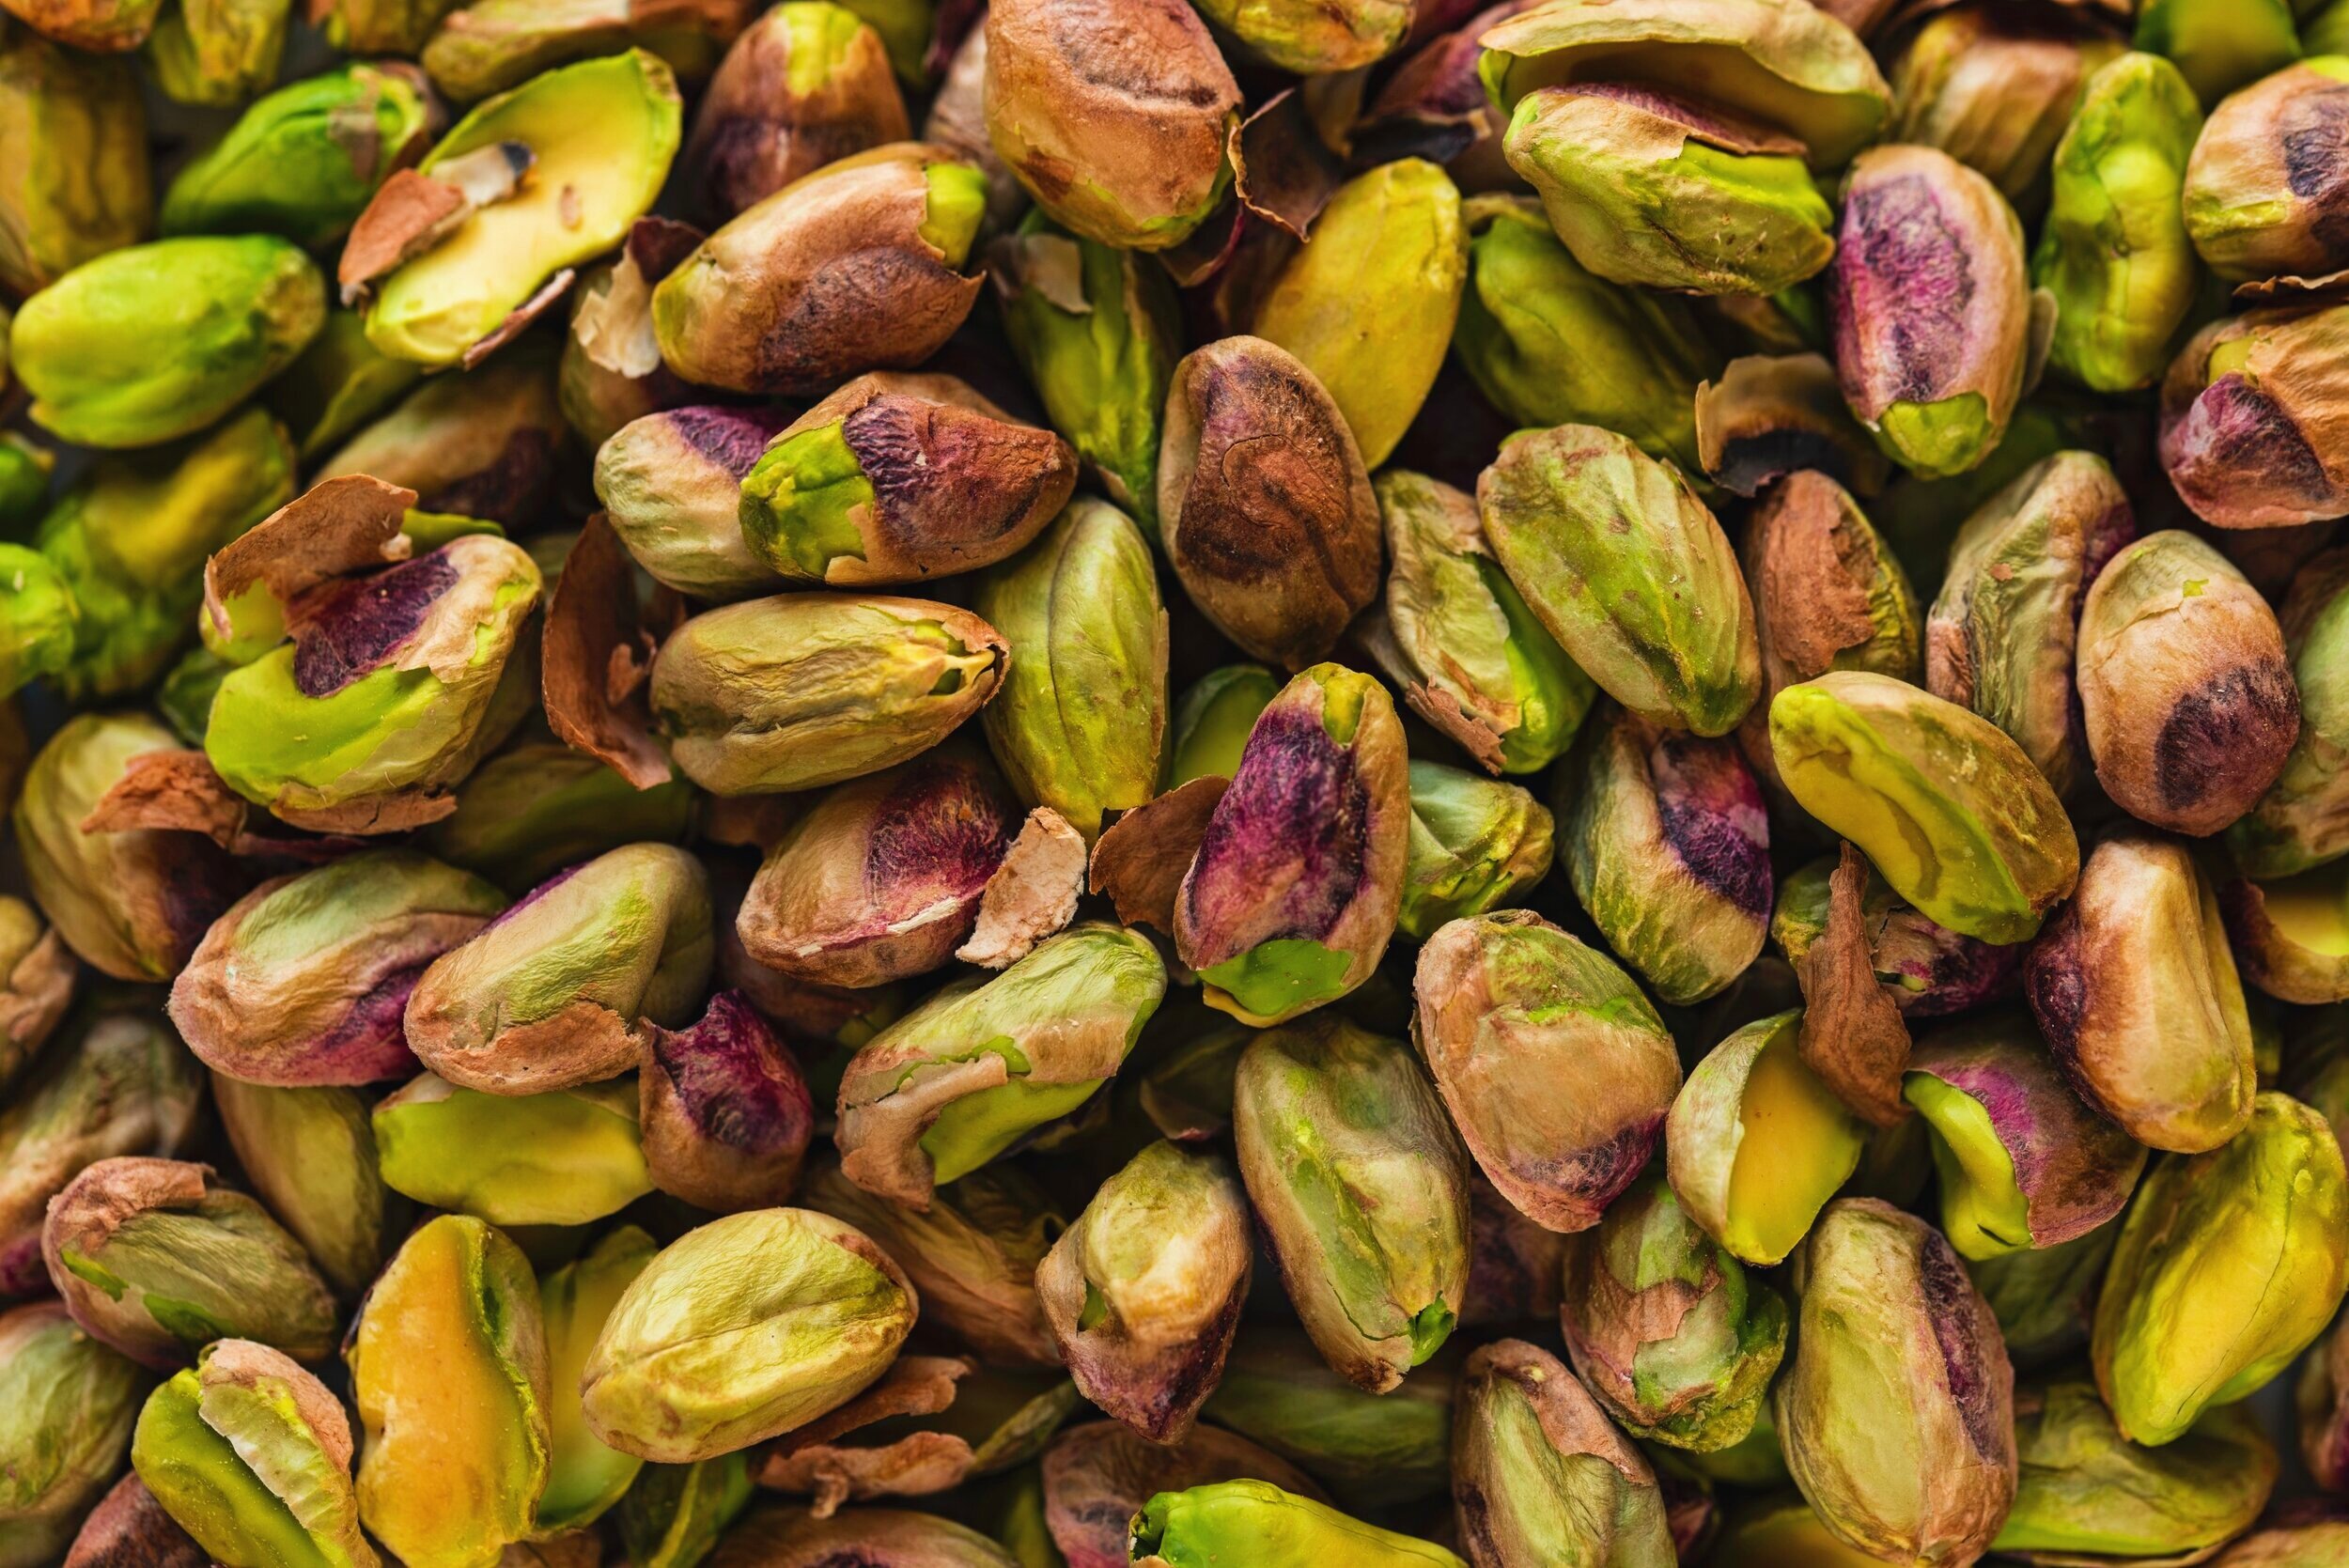 Unsalted pistachios no shell price + wholesale and cheap packing specifications